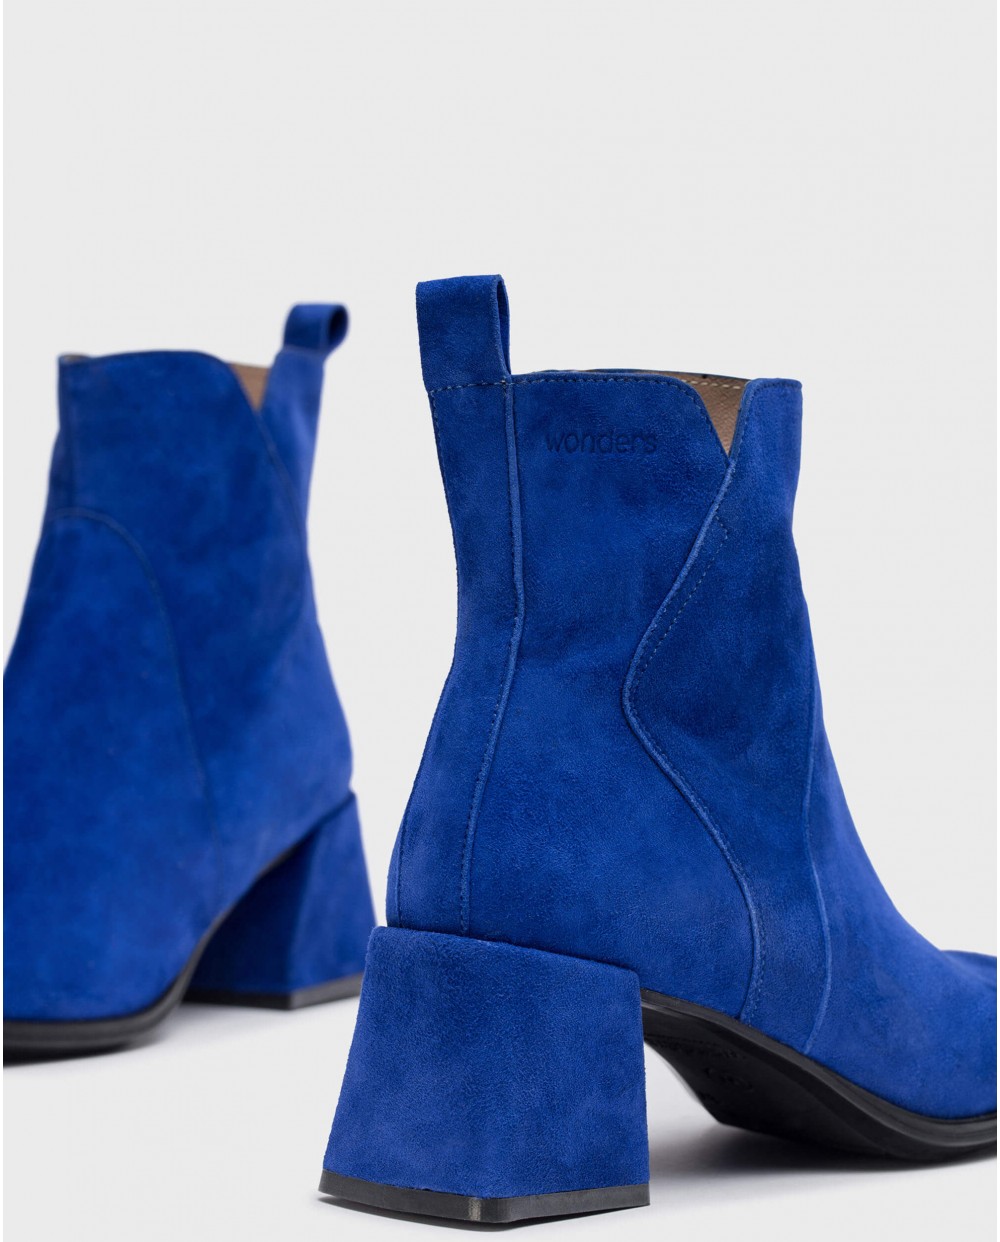 Blue MARINE ankle boot